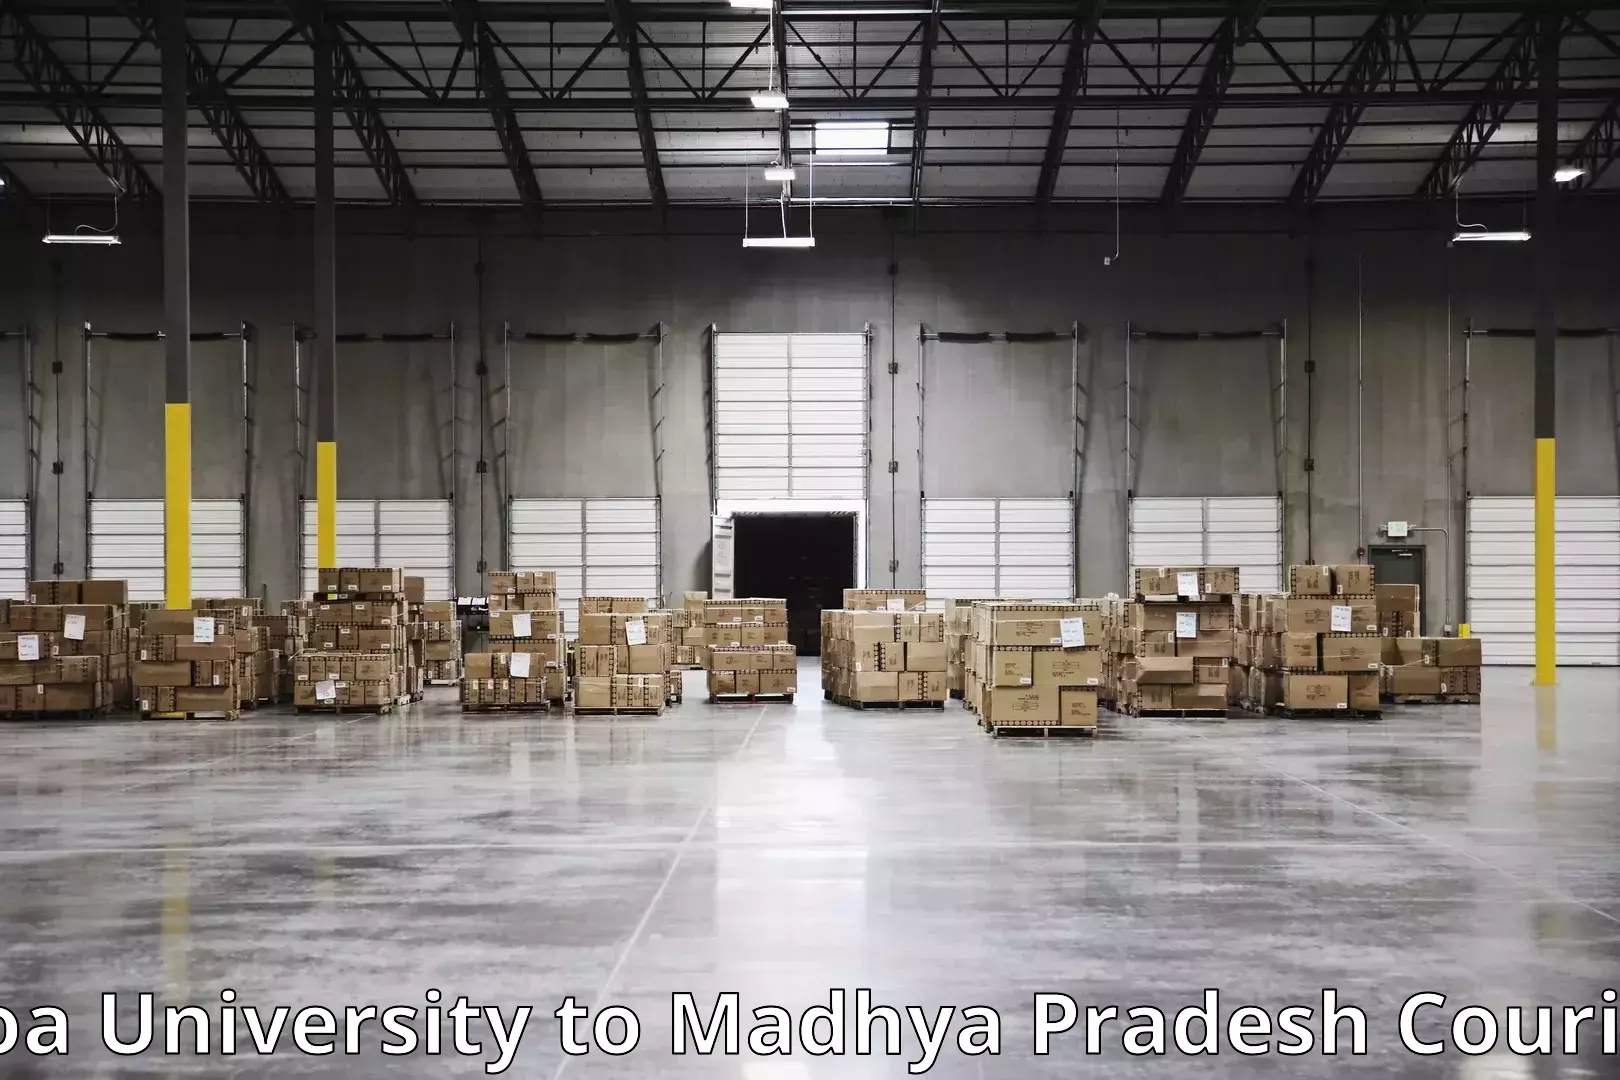 Professional moving assistance in Goa University to Sidhi